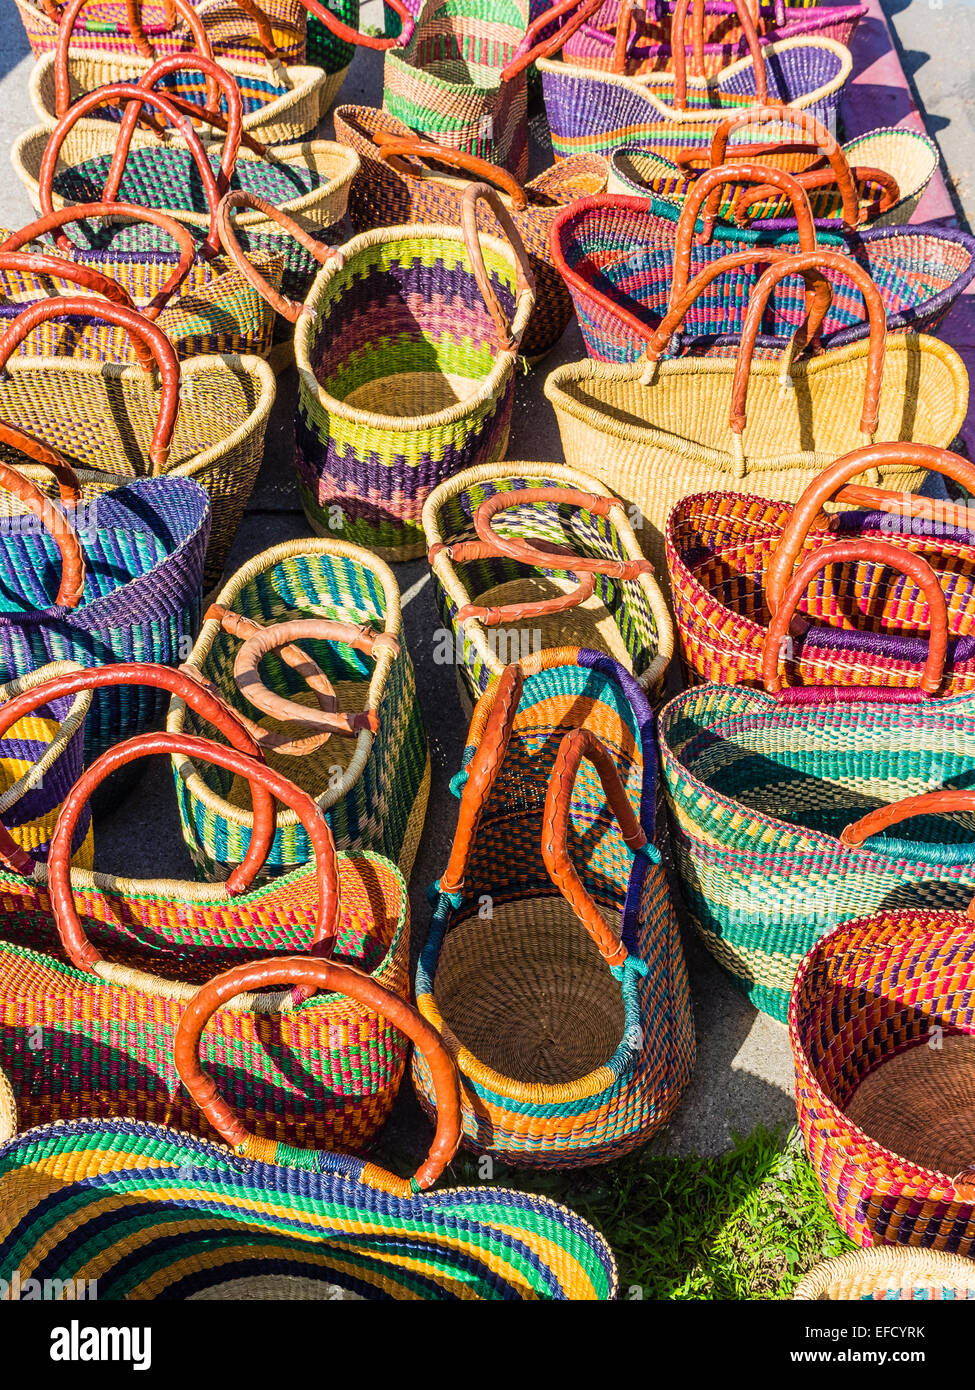 A brightly colored display of handmade baskets from Africa on a sidewalk by the Saturday farmer's market in Santa Barbara, CA. Stock Photo